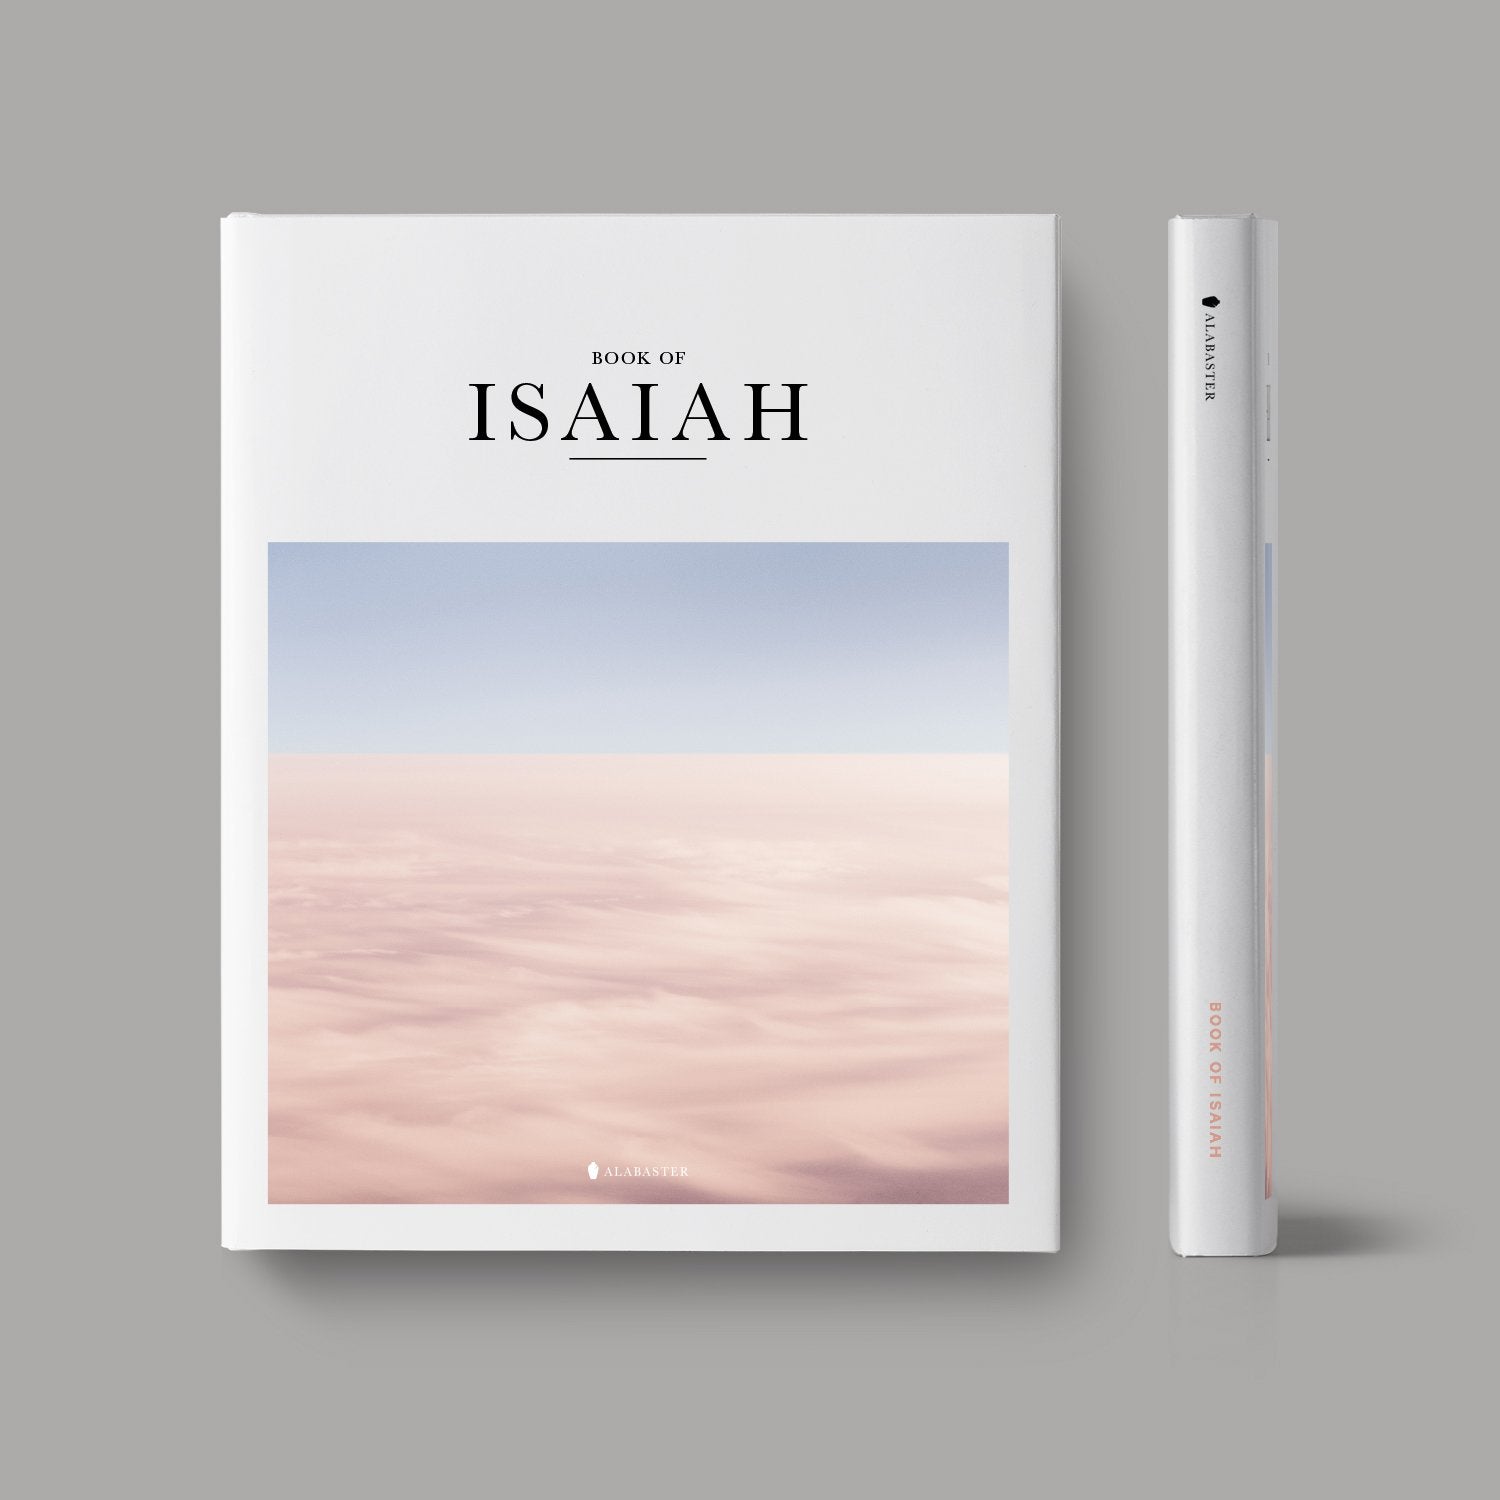 Book of Isaiah hardcover